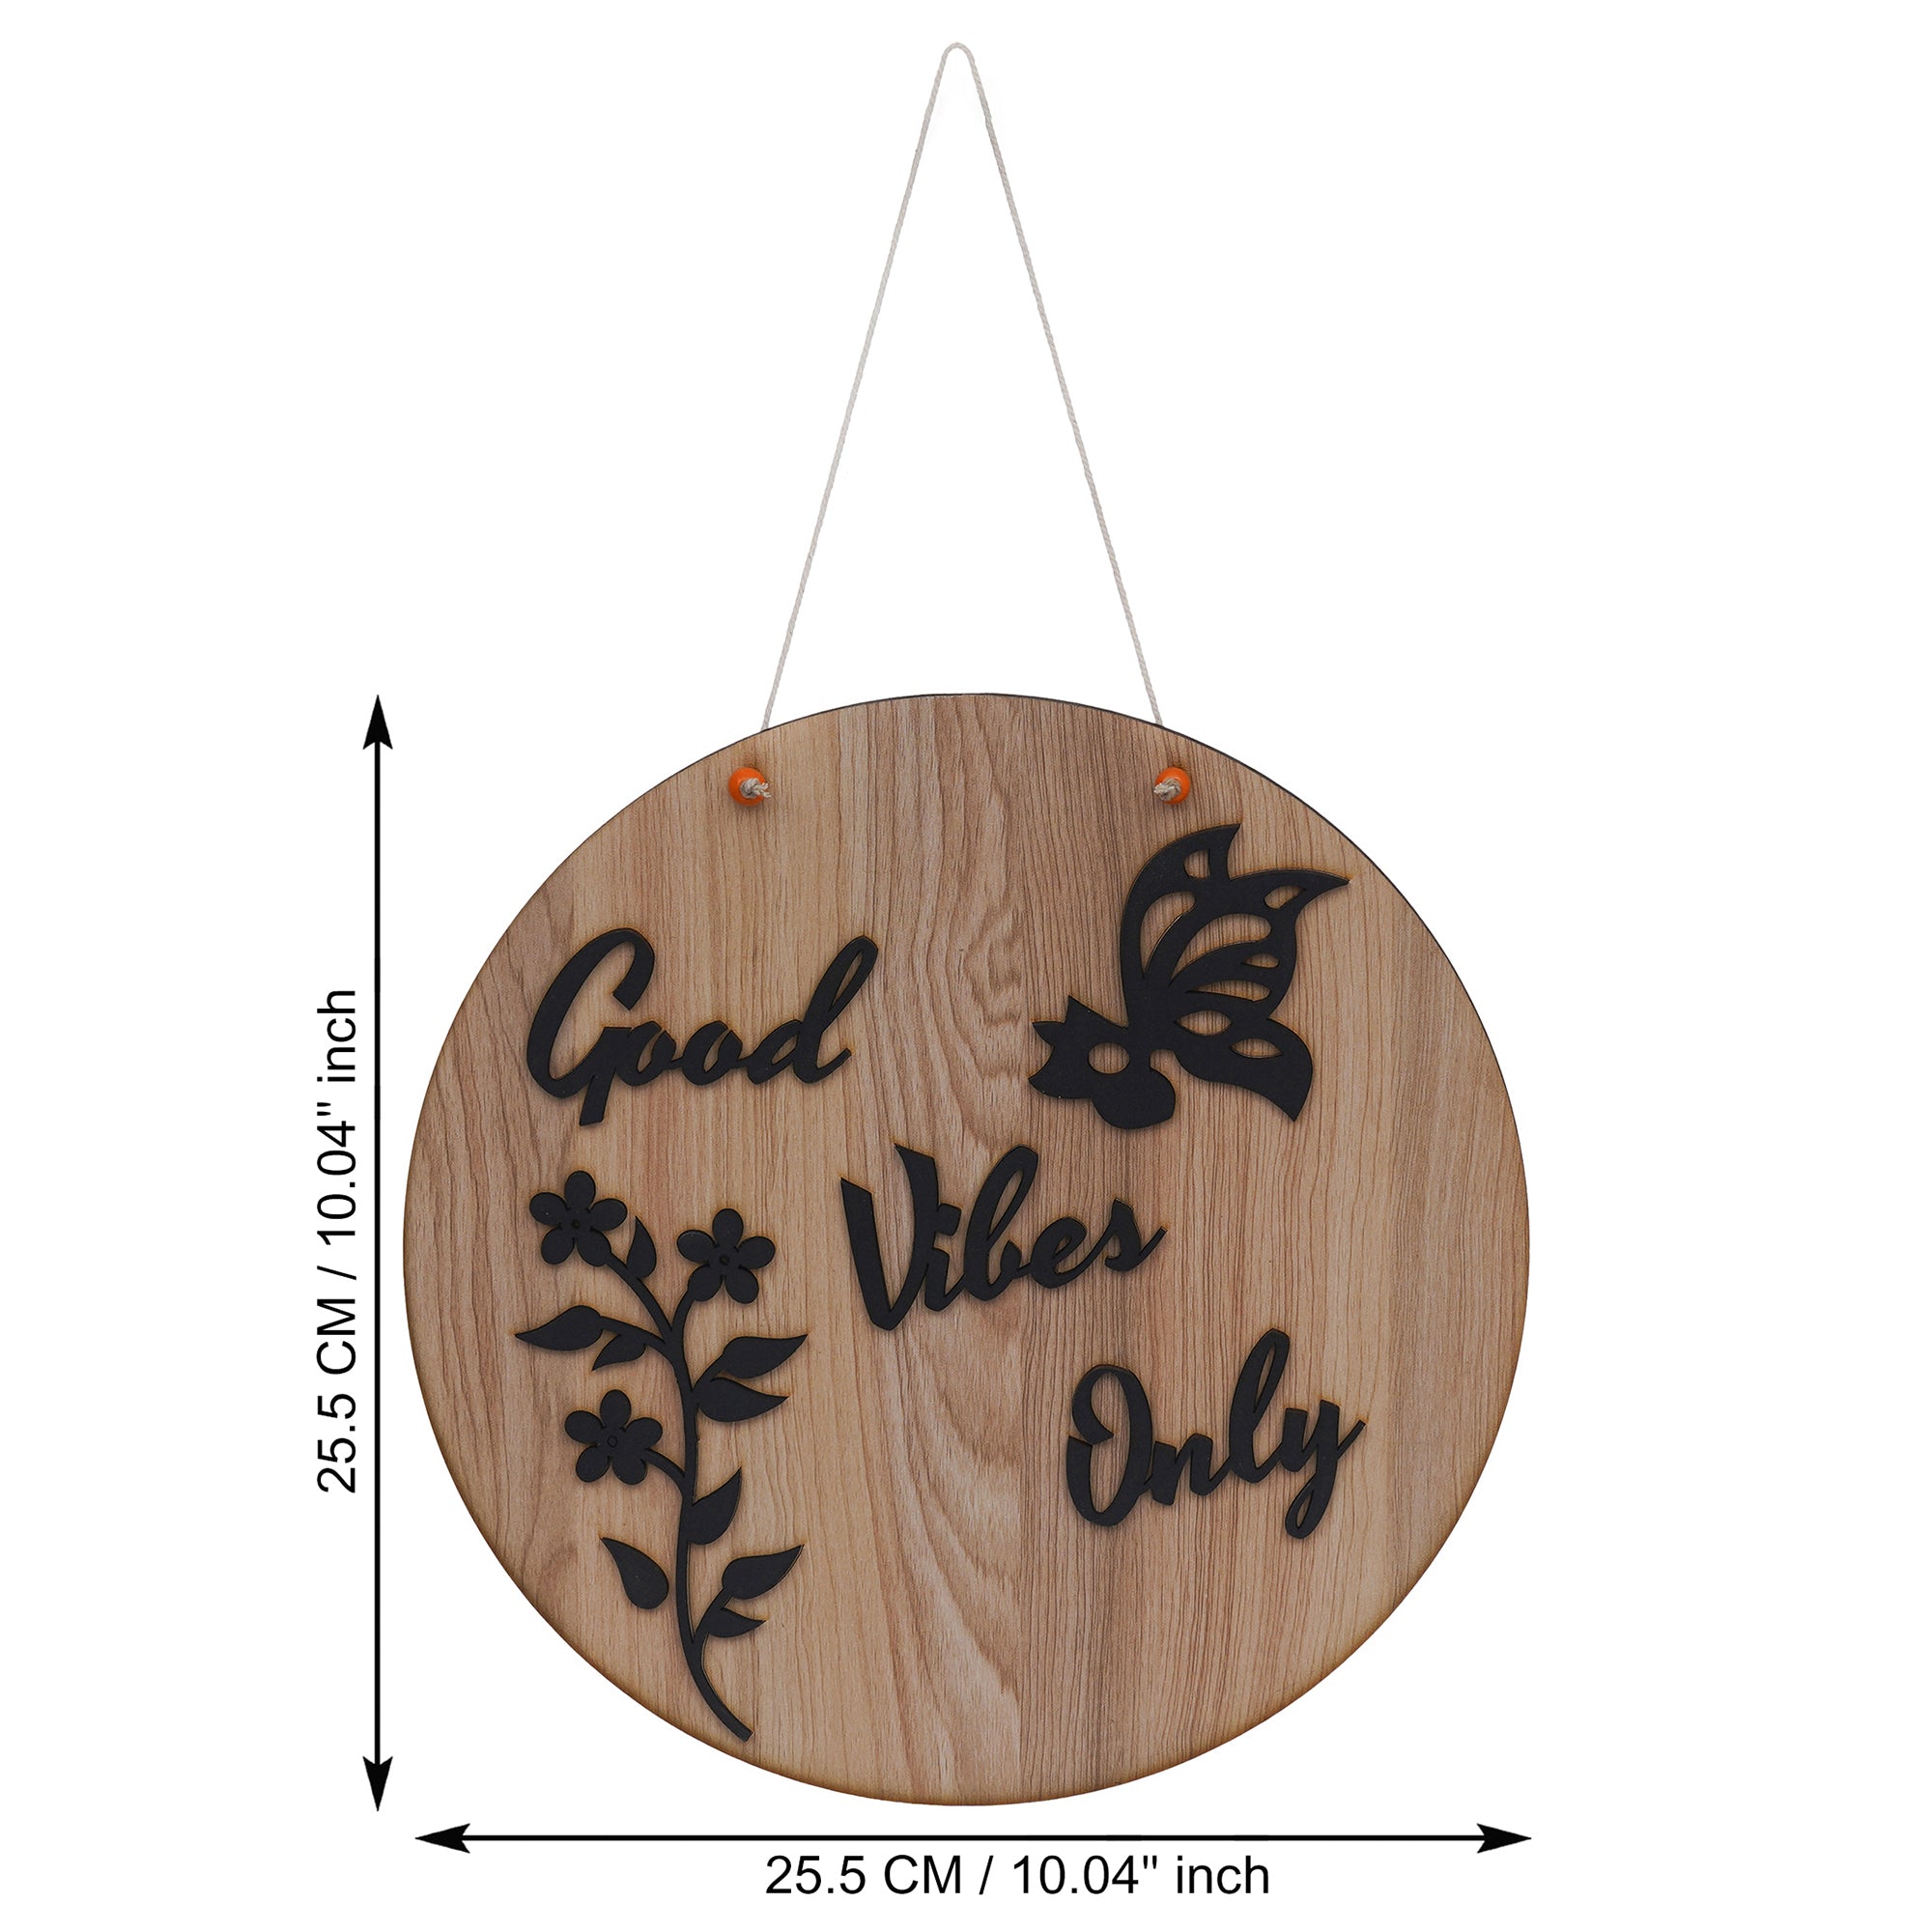 eCraftIndia Brown Wooden "Good Vibes Only" Butterfly & Floral Designer Wall Hanging Showpiece 3